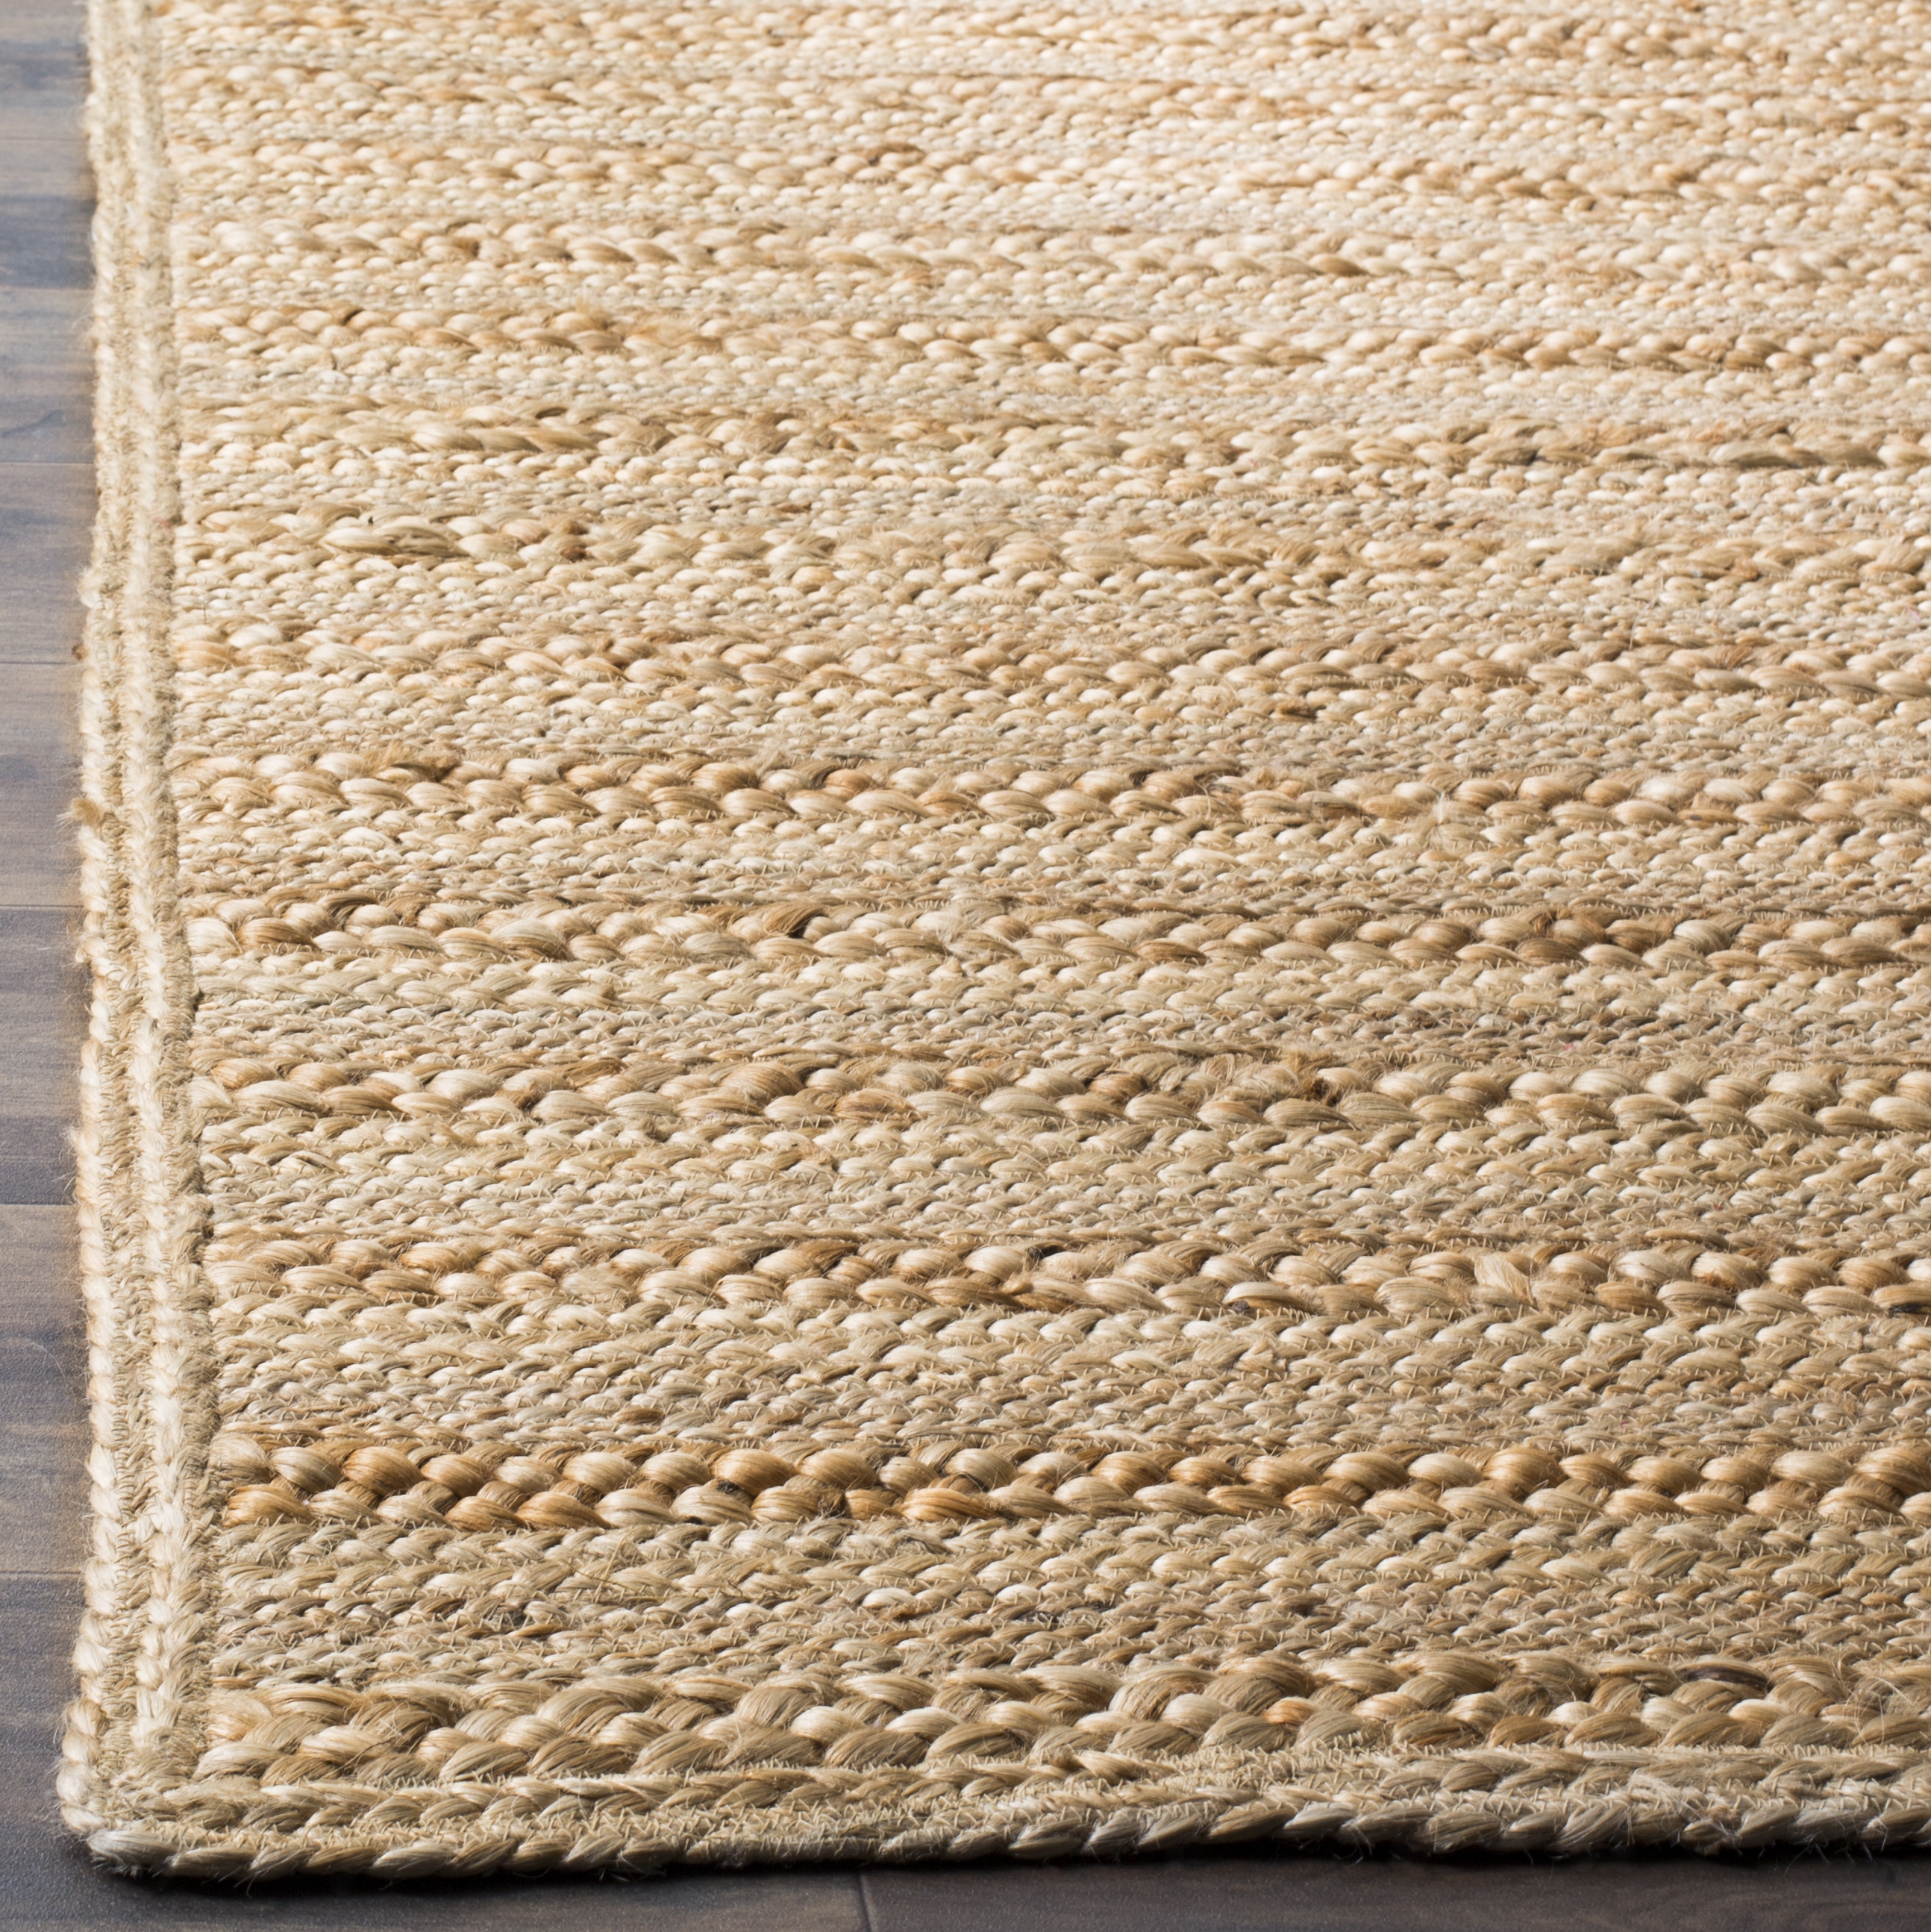 Arlo Home Hand Woven Area Rug, NF871A, Natural,  5' X 8' - Image 2